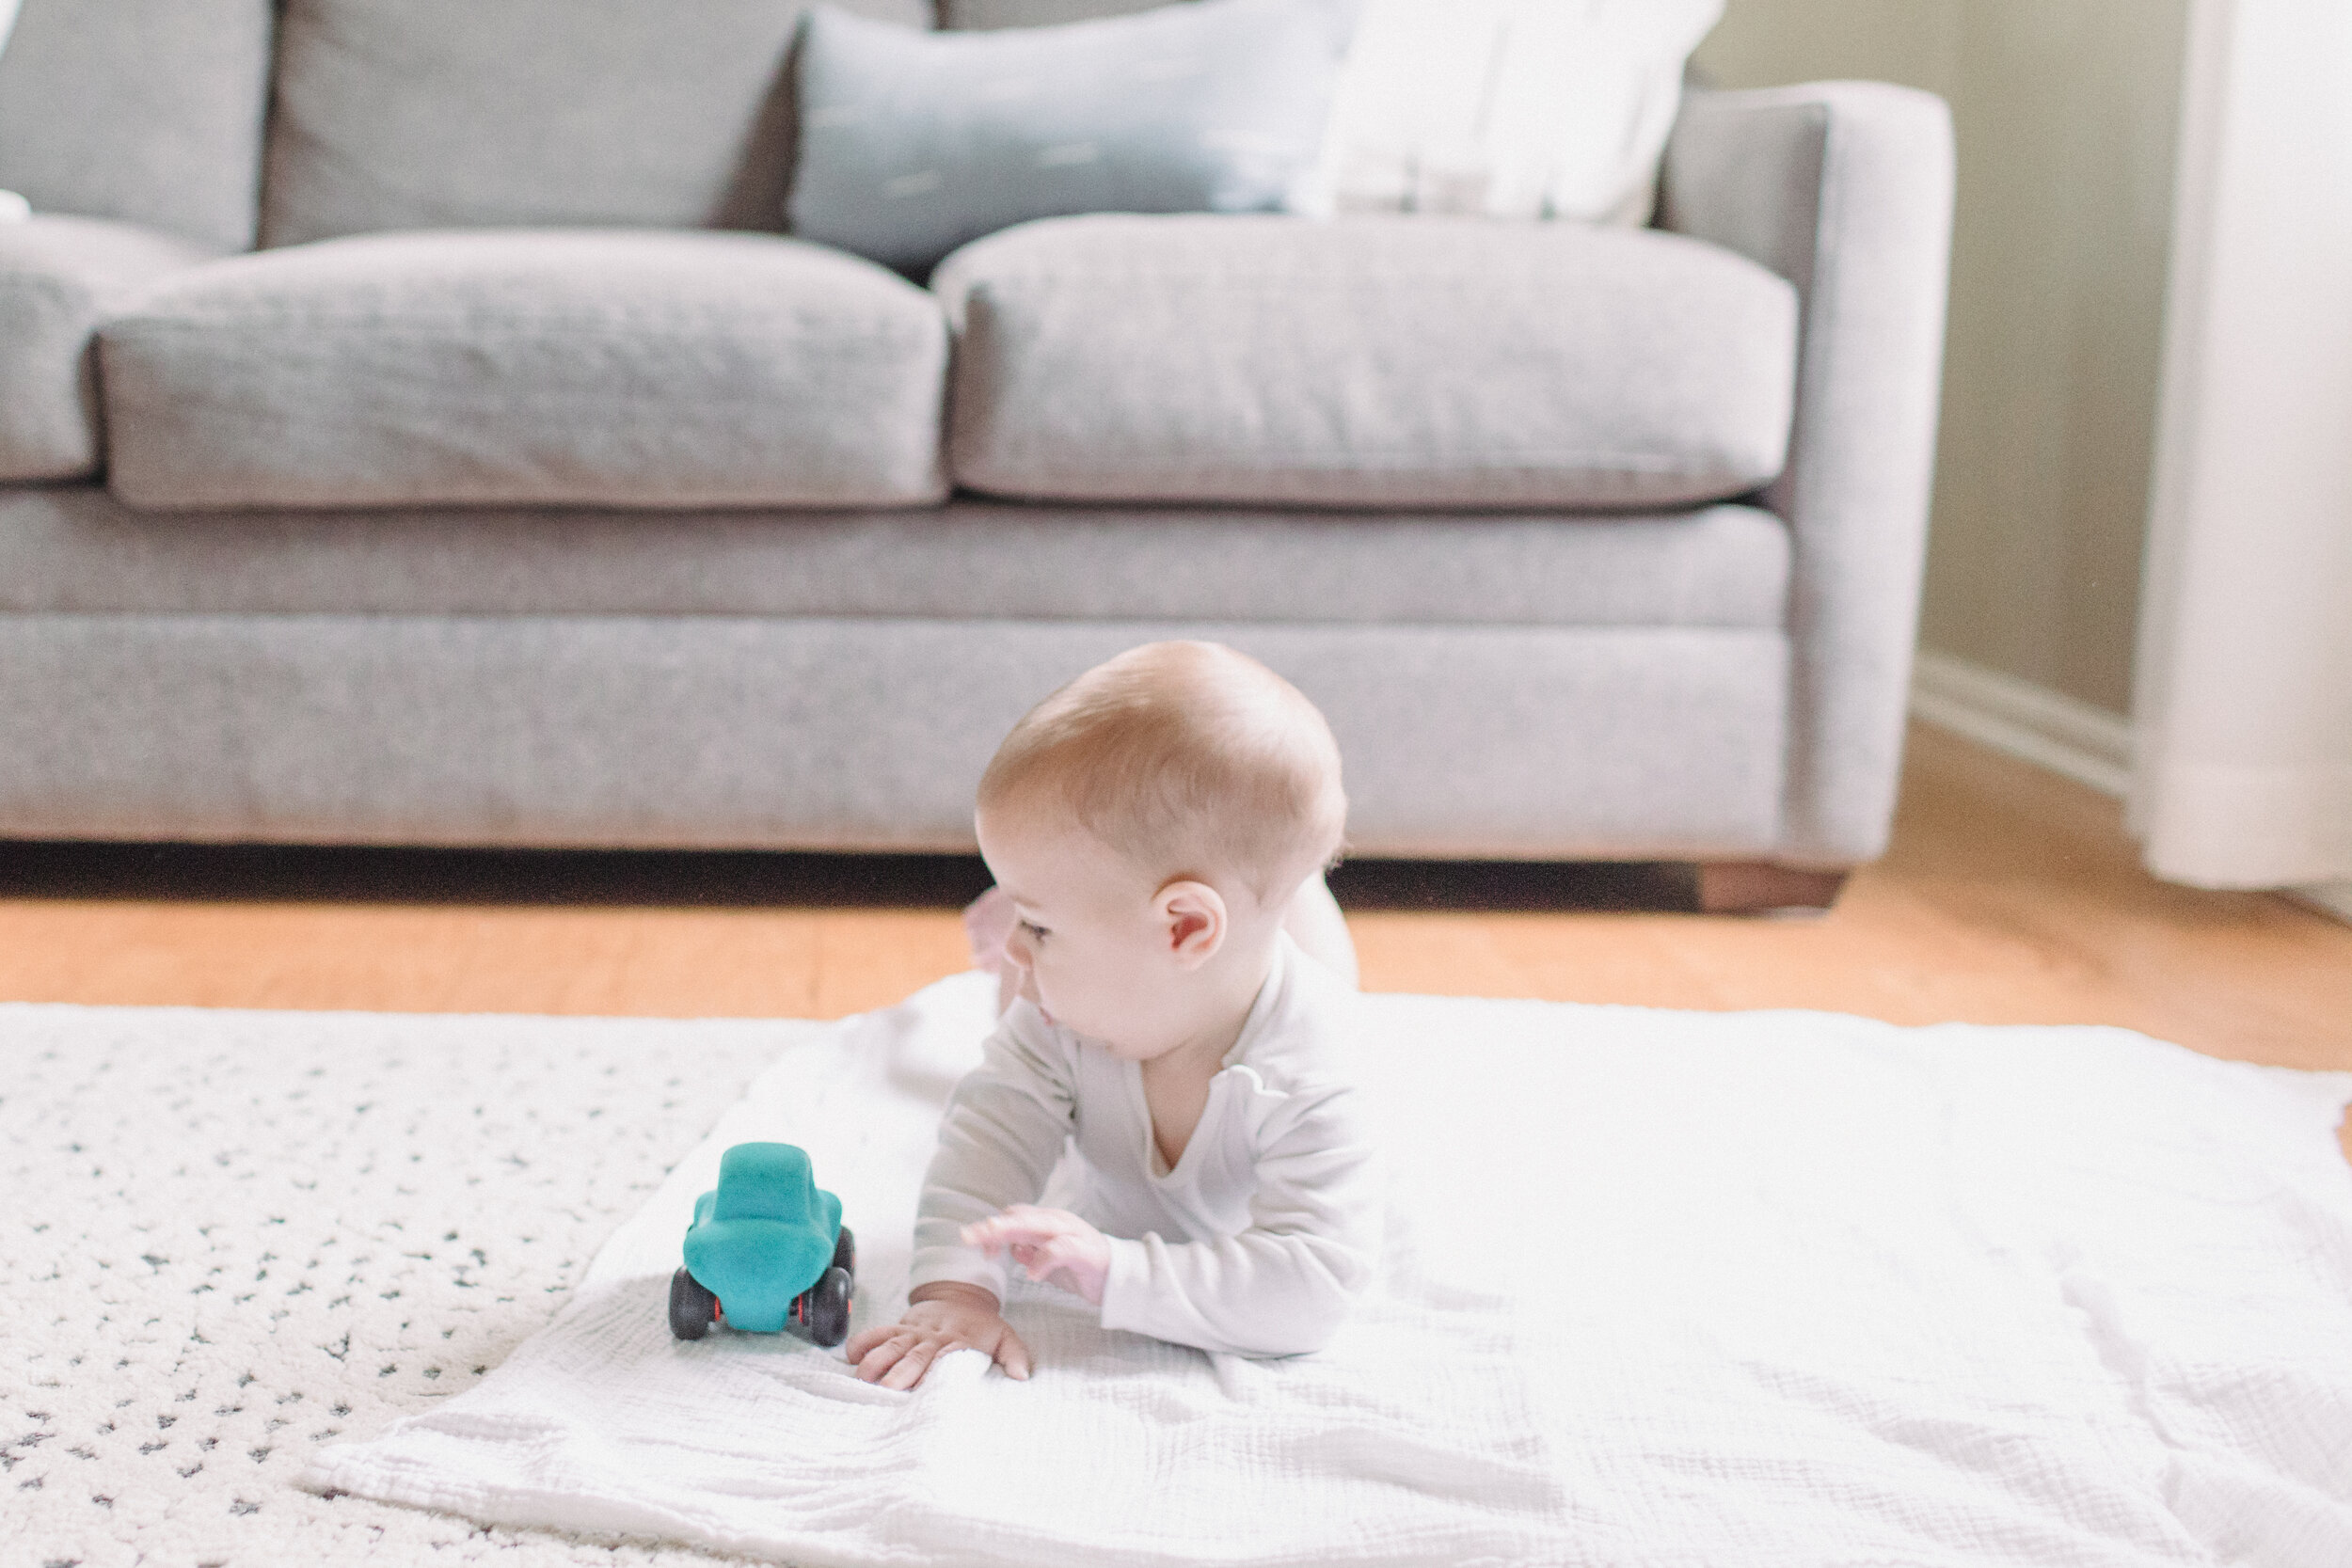 Tummy time: When should I start and why it is important